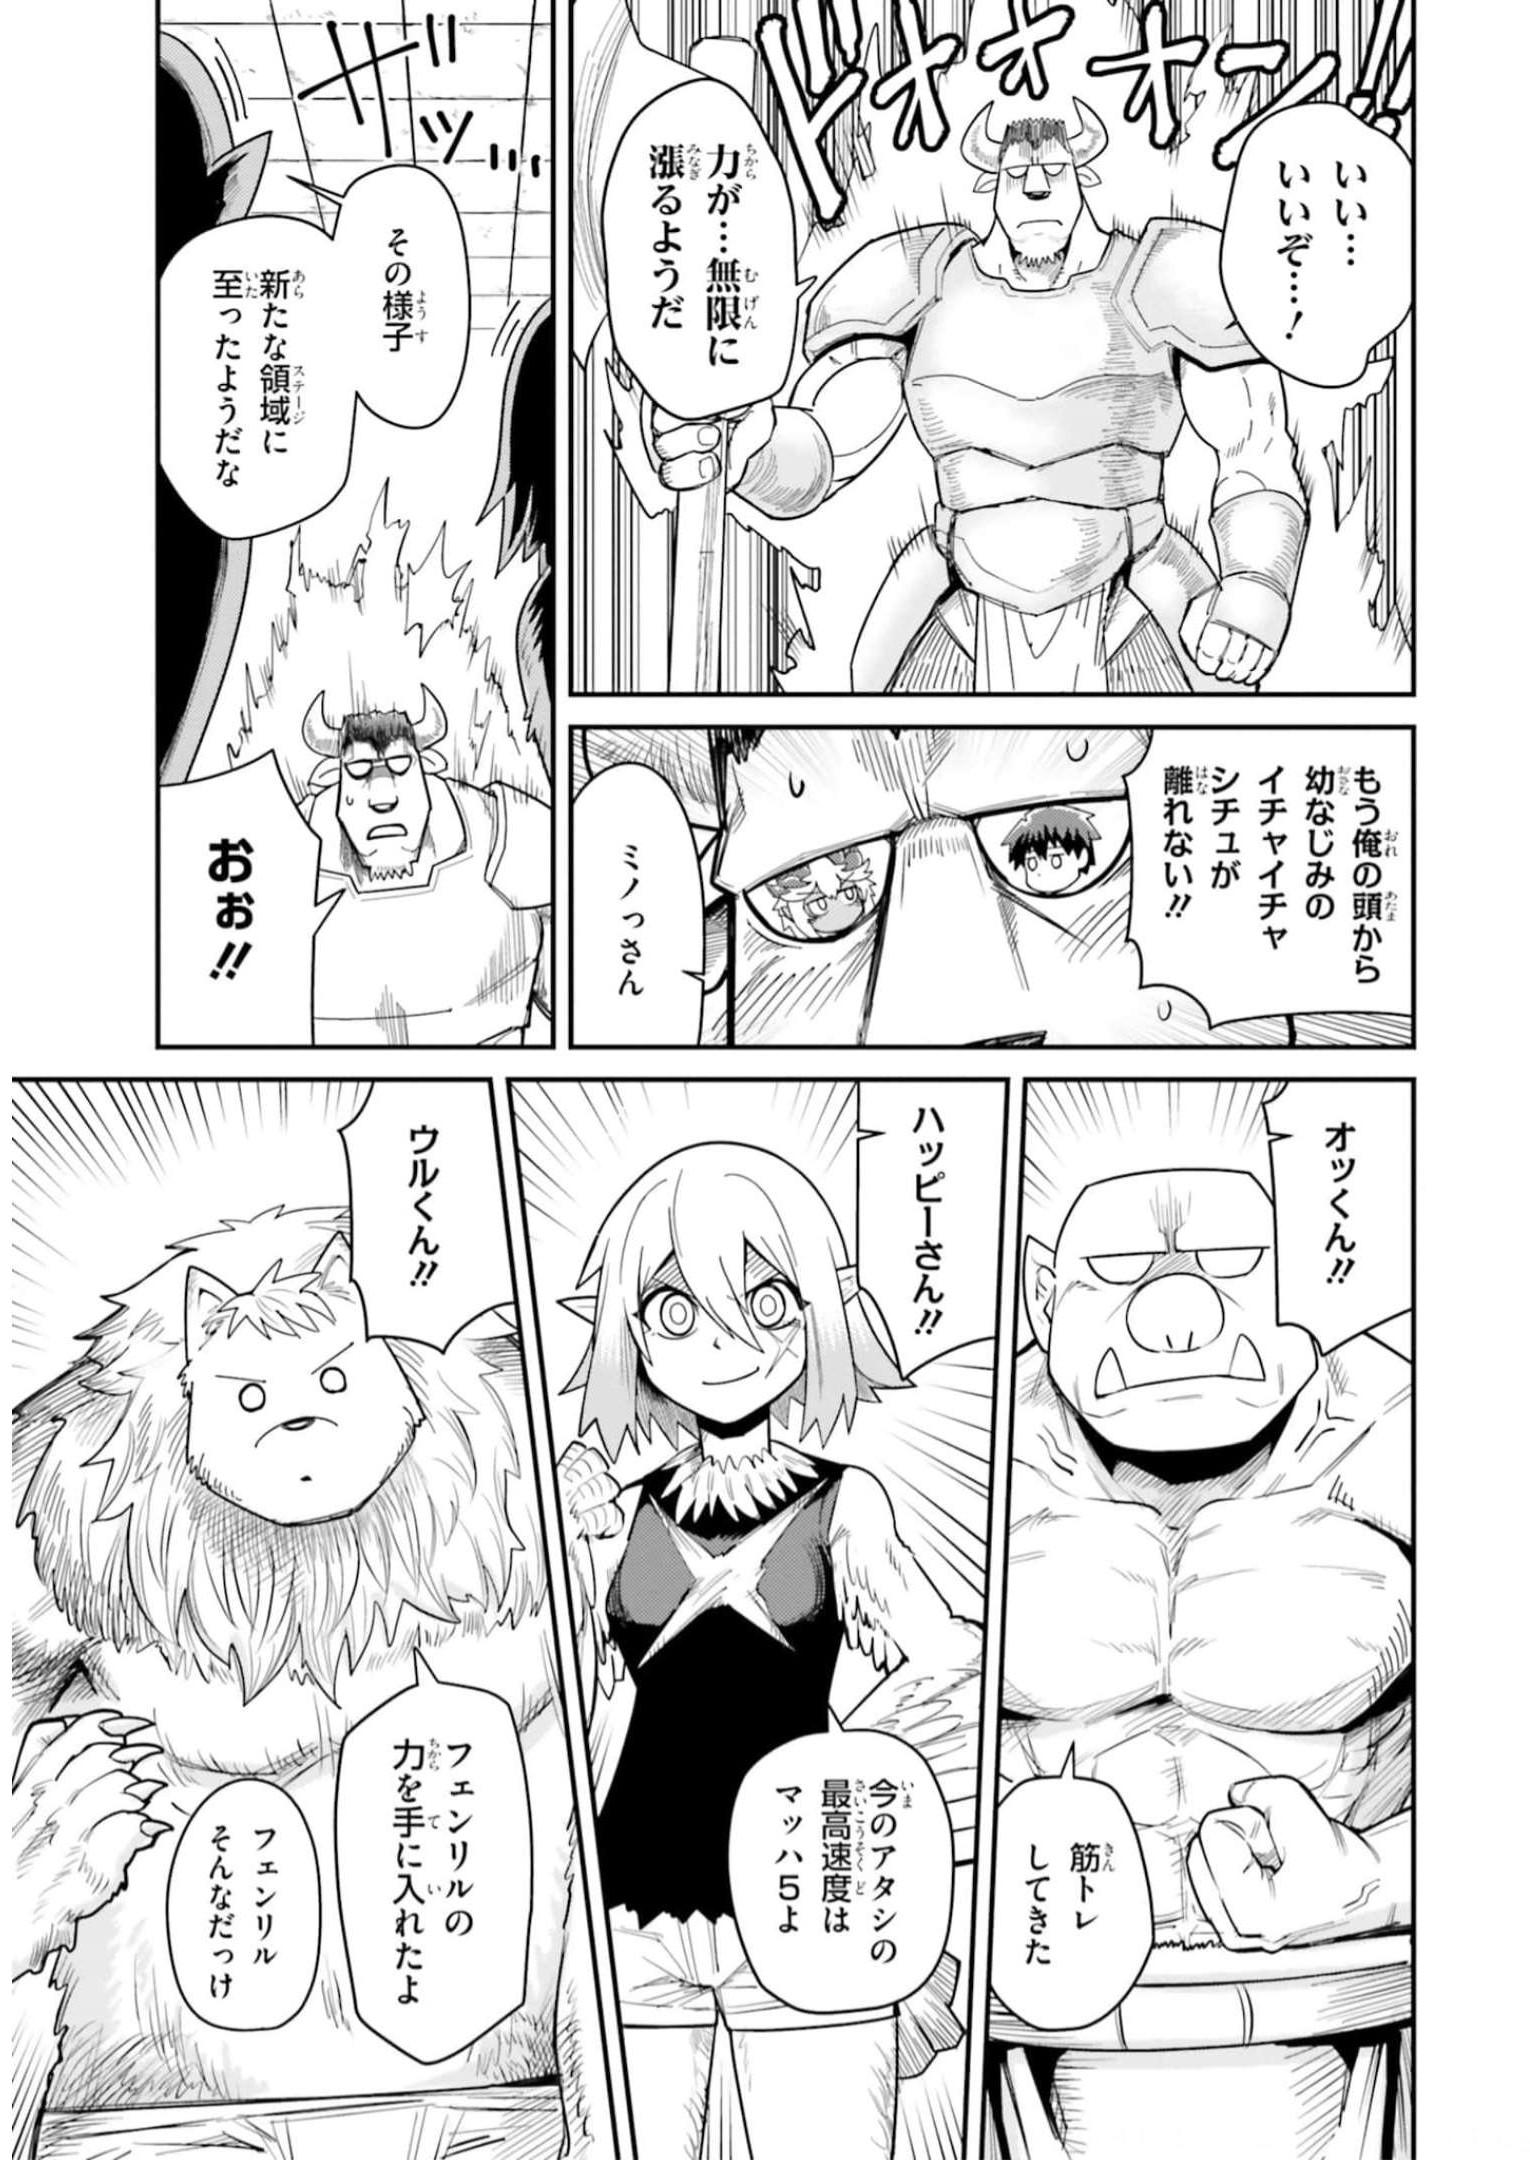 Dungeon Friends Forever Dungeon’s Childhood Friend ダンジョンの幼なじみ 第11話 - Page 11